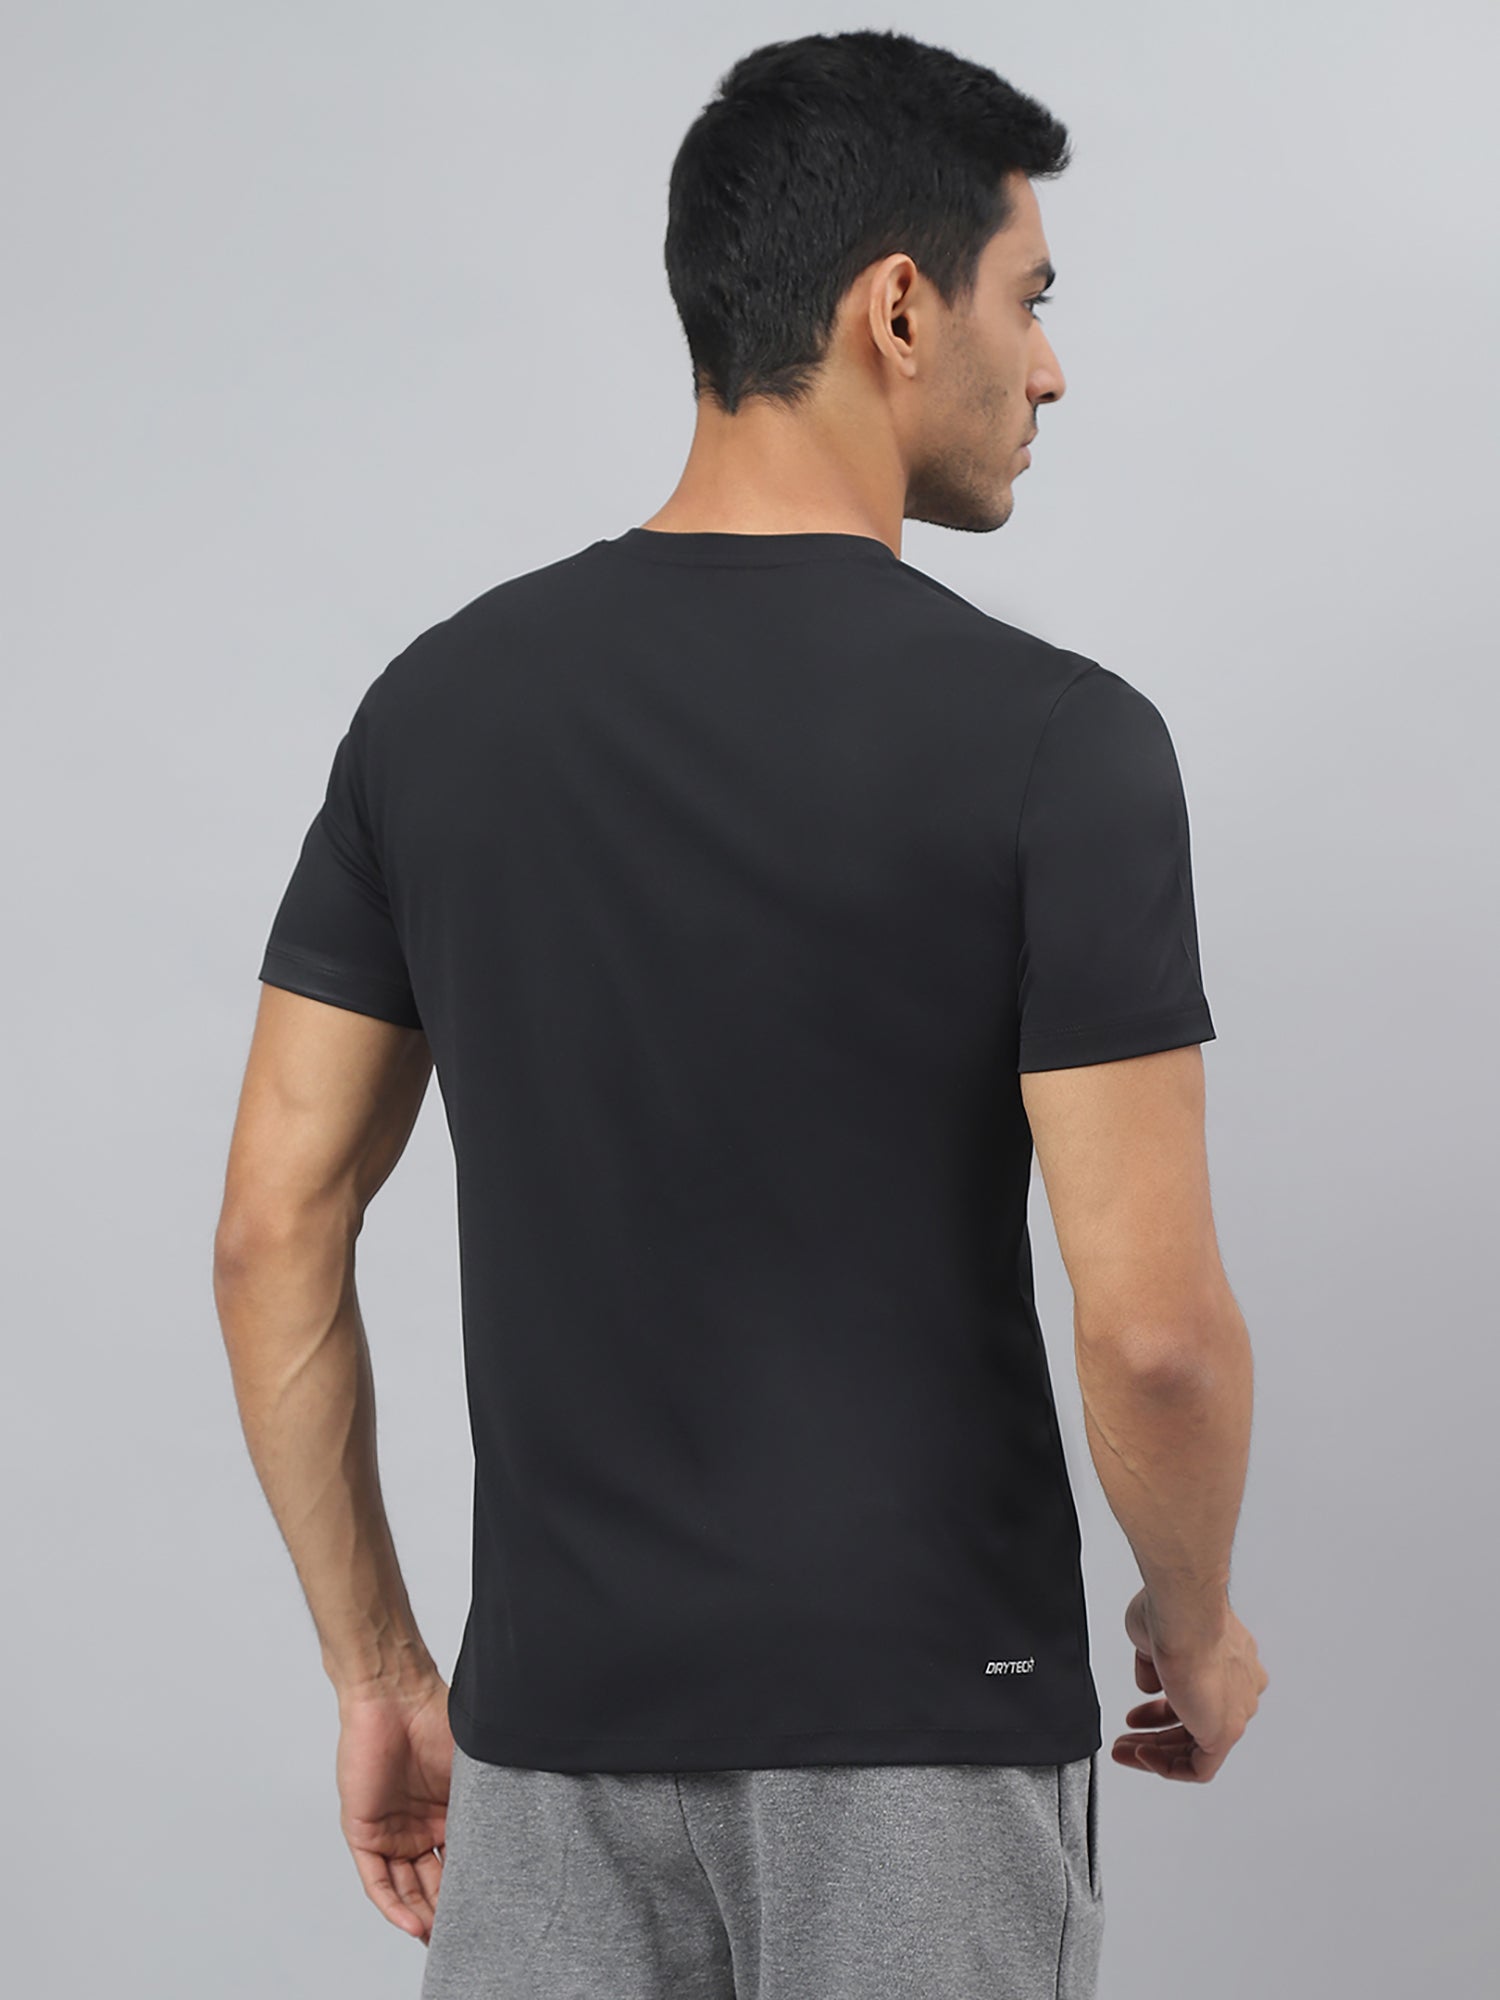 Alcis Men Black Anti-Static Soft-Touch Slim-Fit Sports for All Round Neck Wonder T-Shirt